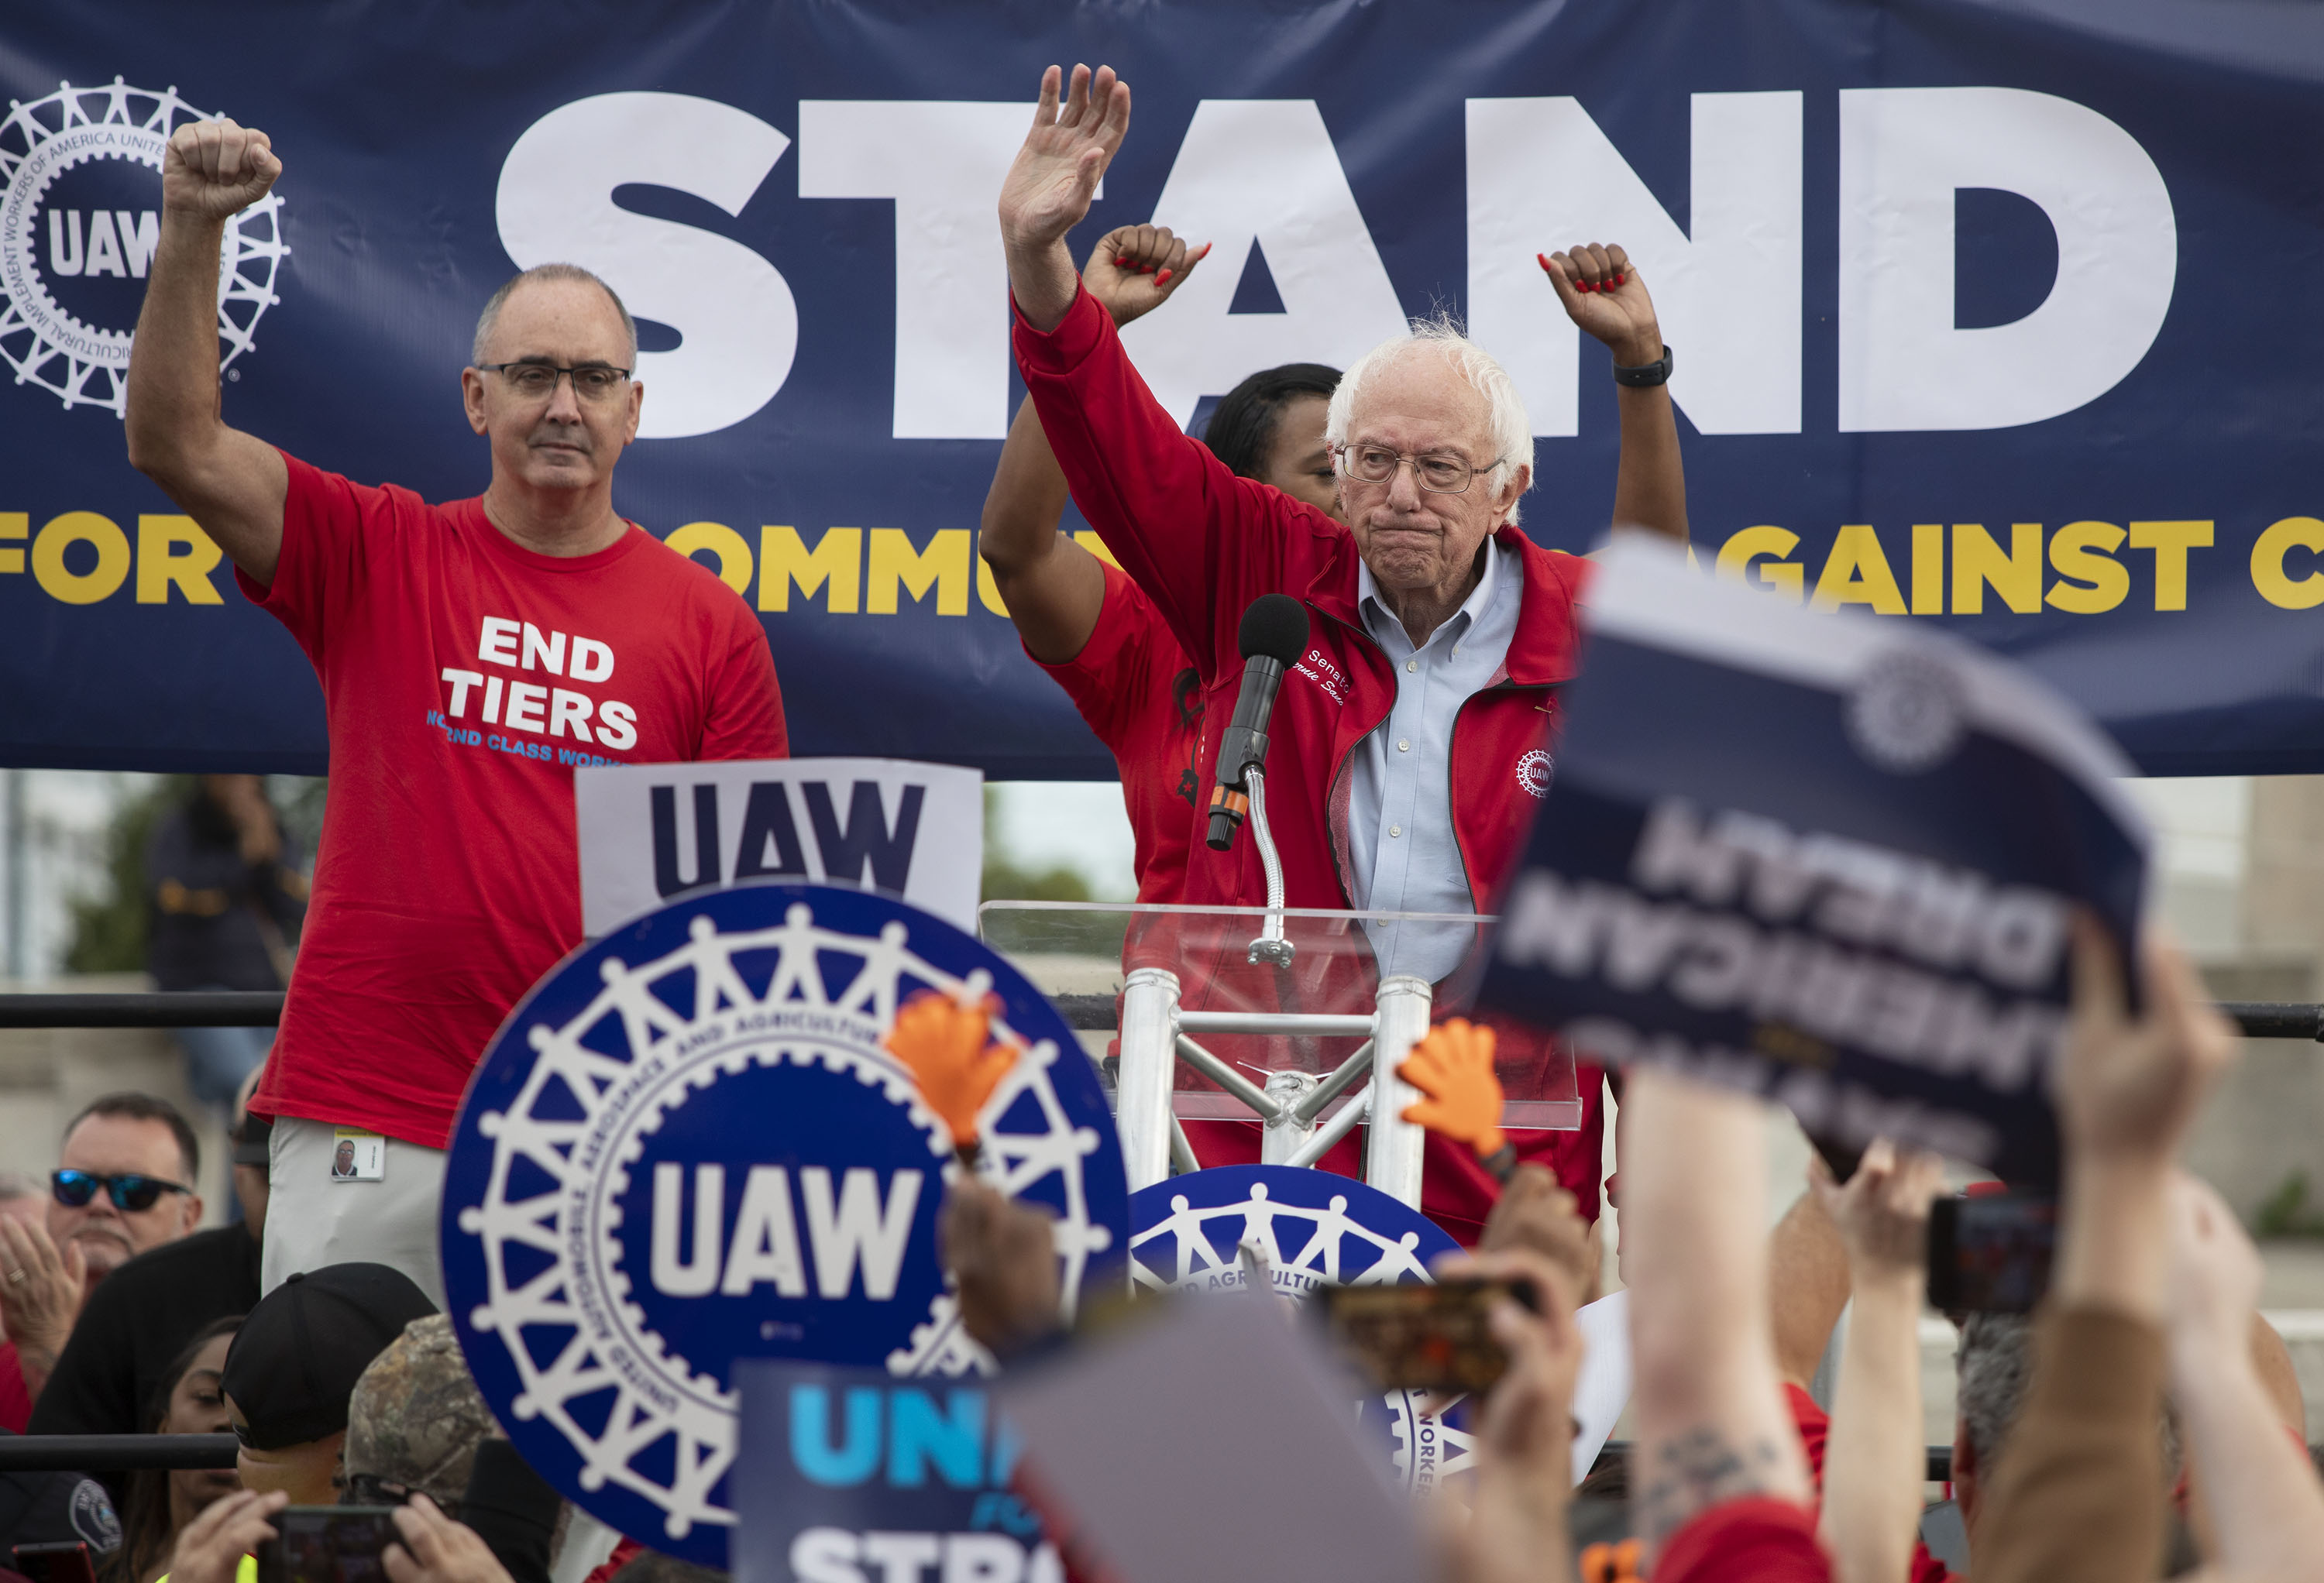 Bernie Sanders and UAW President Shawn Fain, left, speak at a rally in support of United Auto Workers members as they strike in Detroit, Michigan, on September 15.